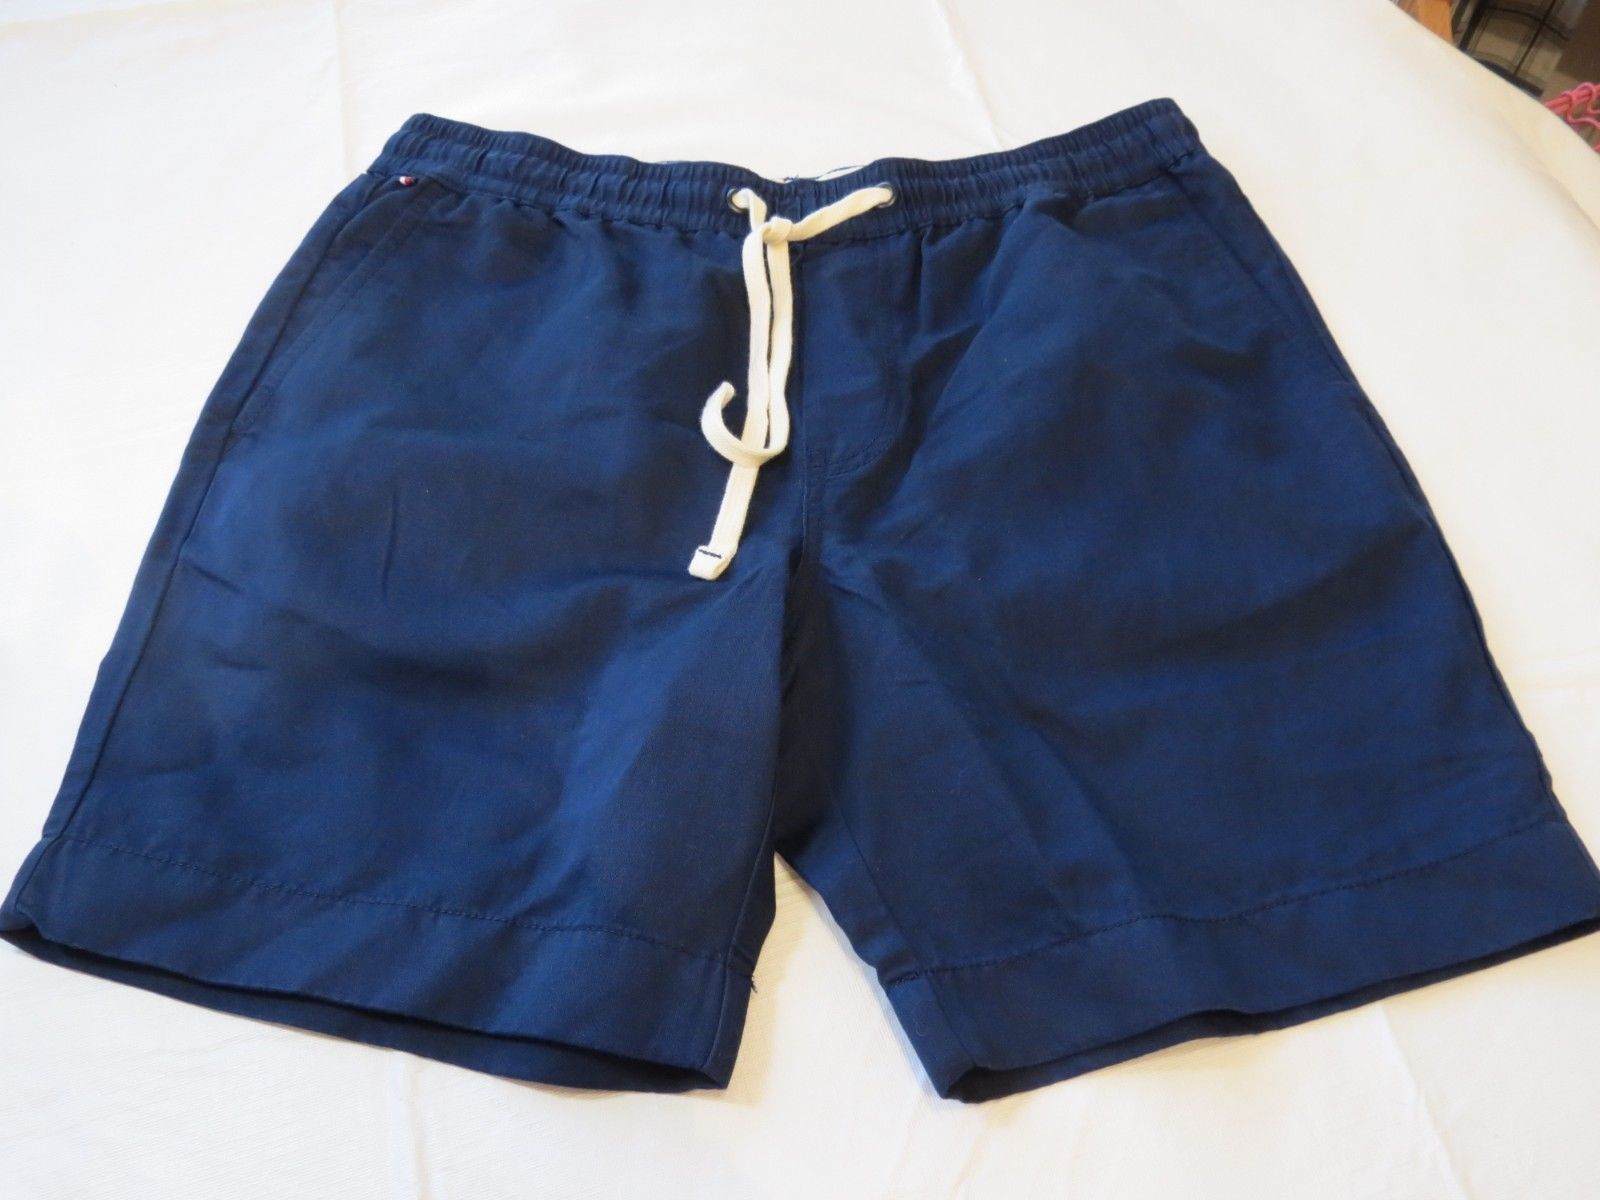 Tommy Hilfiger Mens Shorts Casual 78C5926 409 navy blue L large 7" Inseam - $40.09